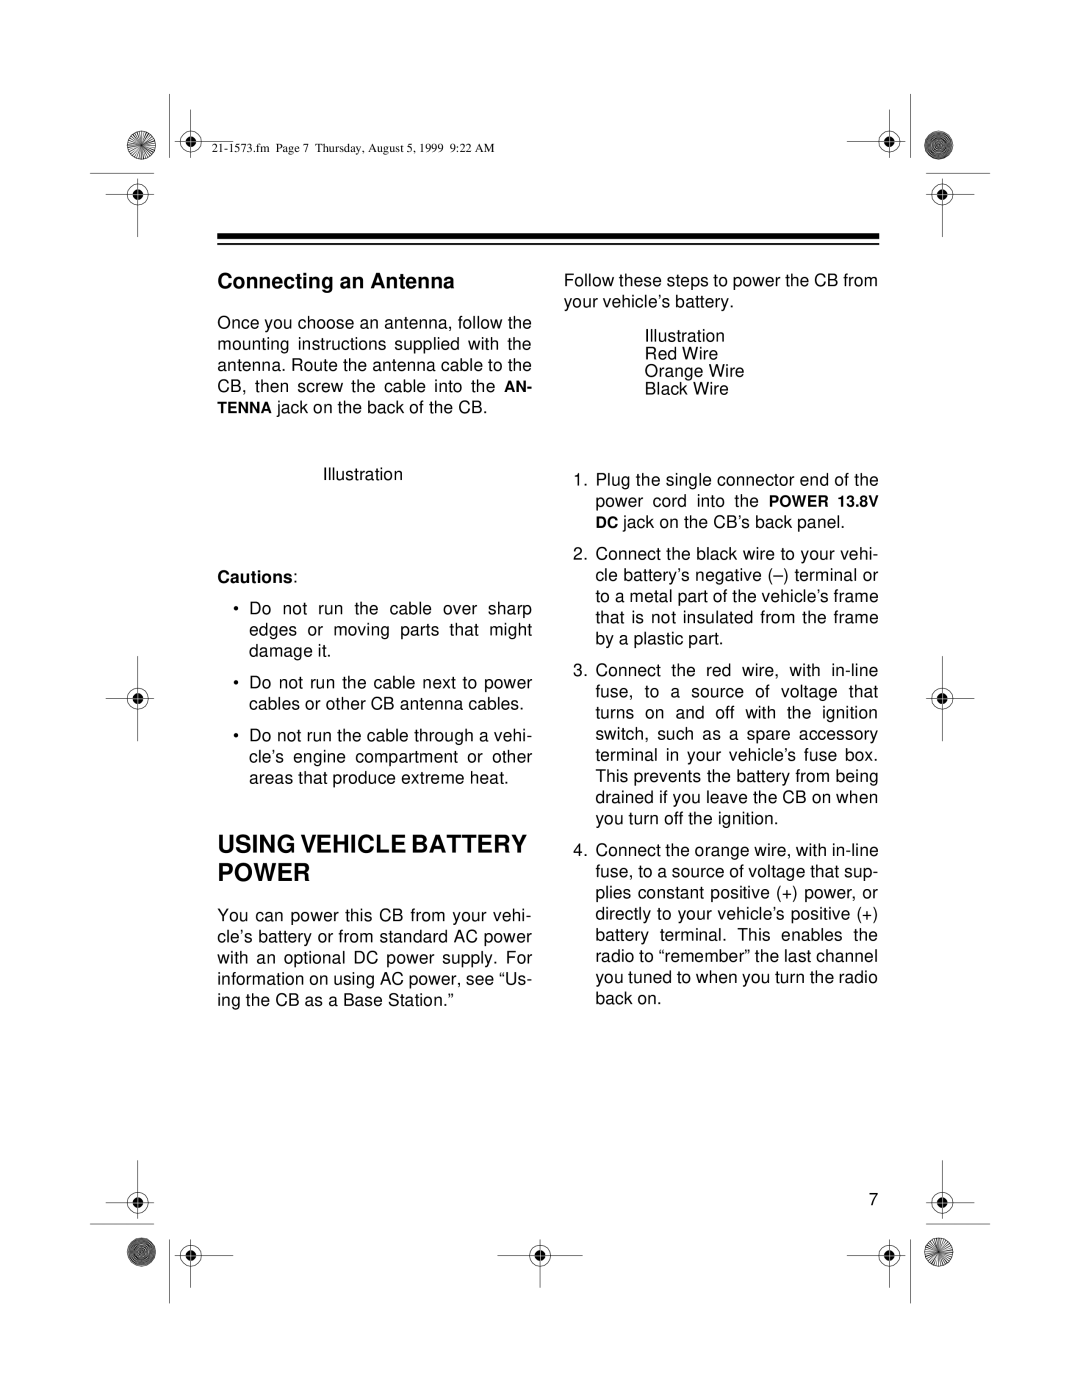 Samsung TRC-445 owner manual Using Vehicle Battery Power, Connecting an Antenna 